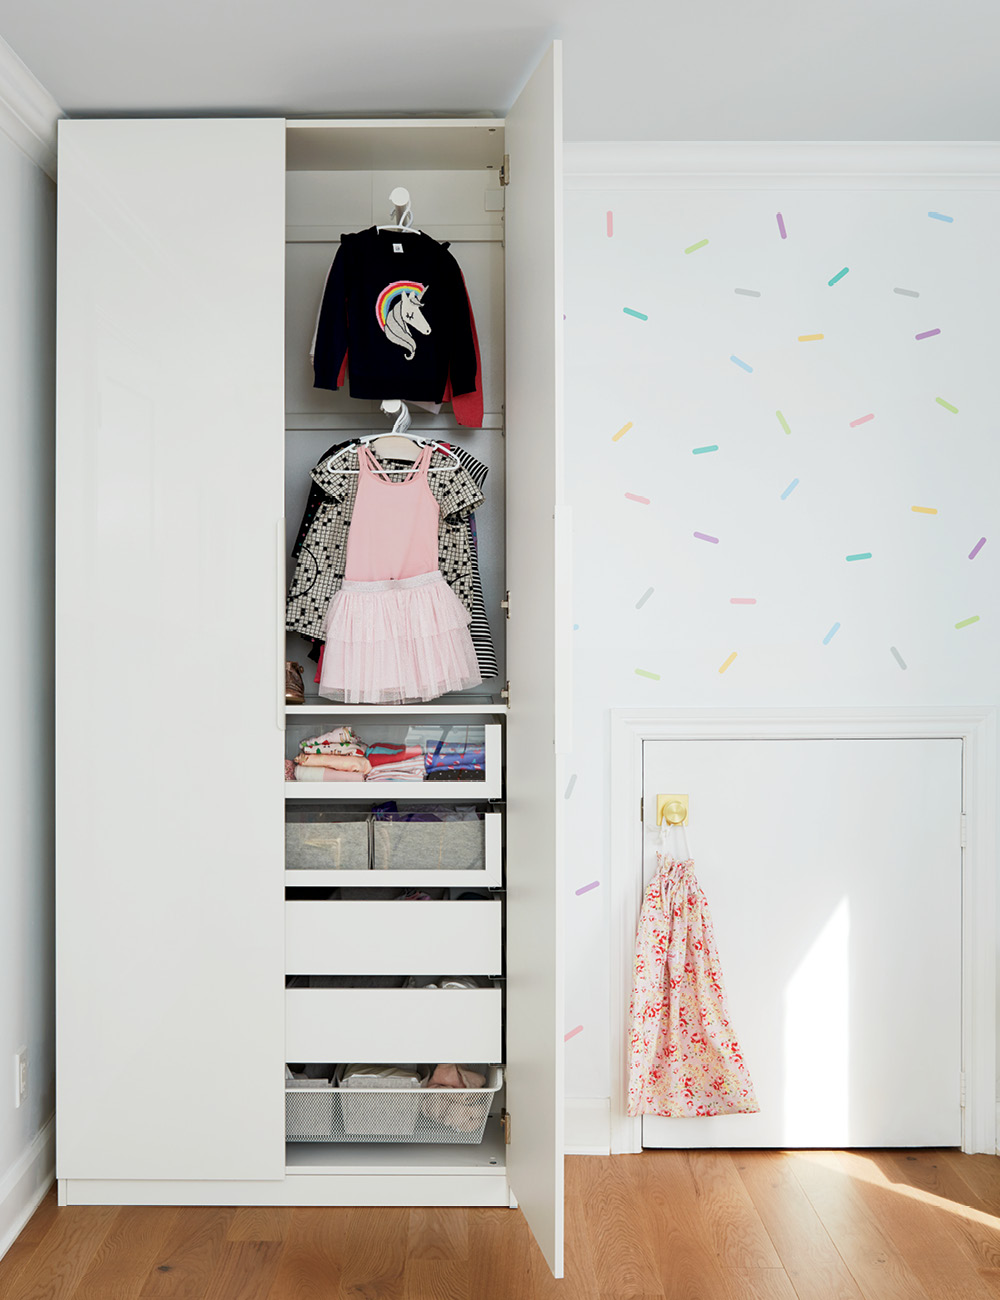 A white IKEA wardrobe filled with children's clothing